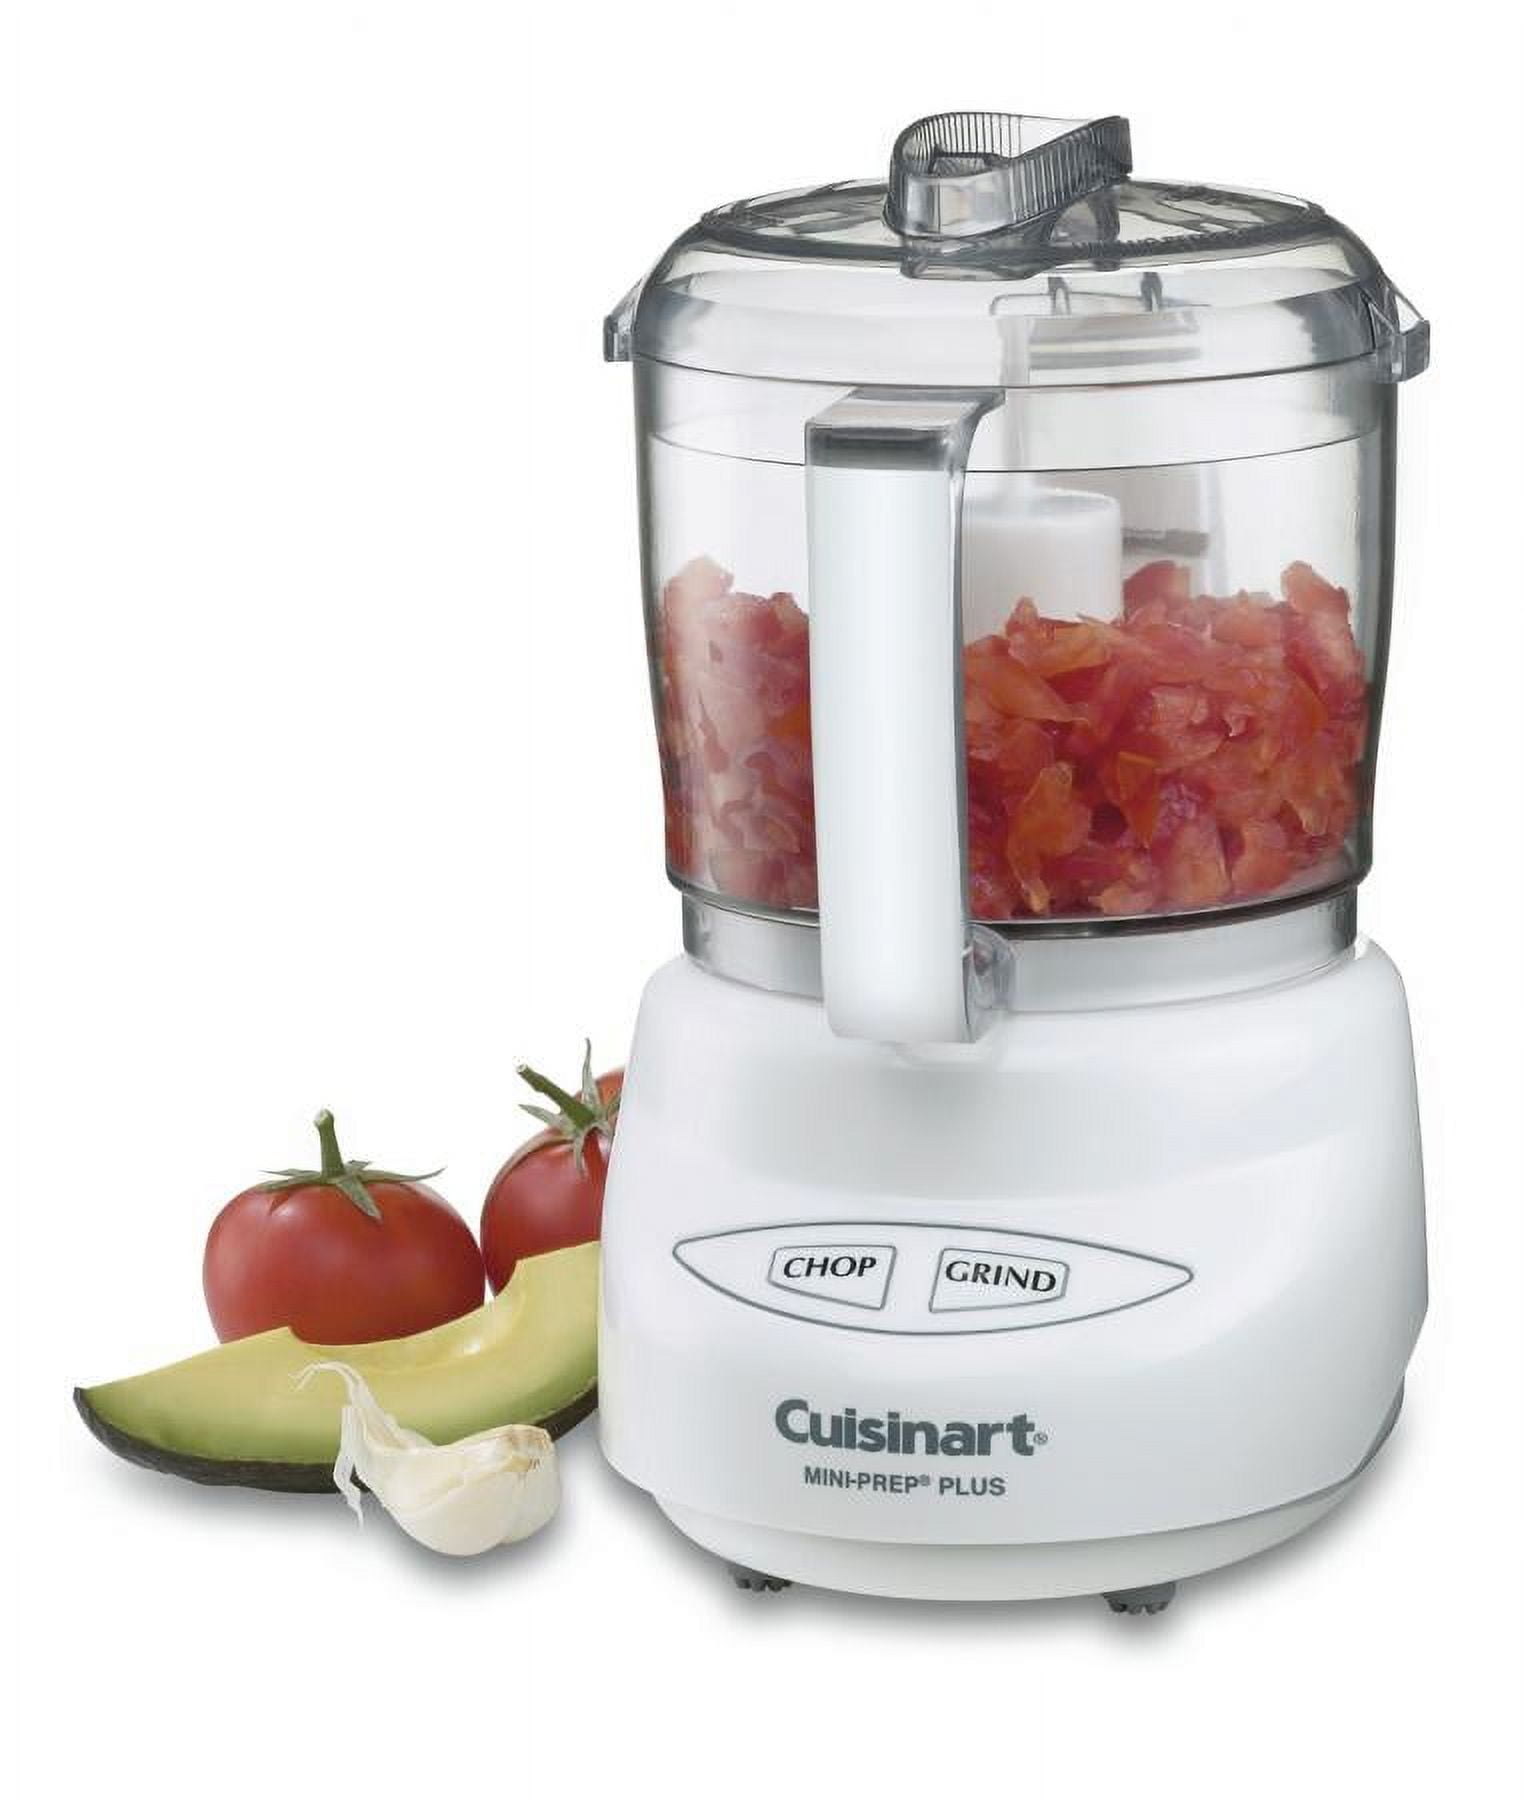 Cuisinart 4-Cup Mini-Prep Plus Food Processor, Brushed Stainless, Tested